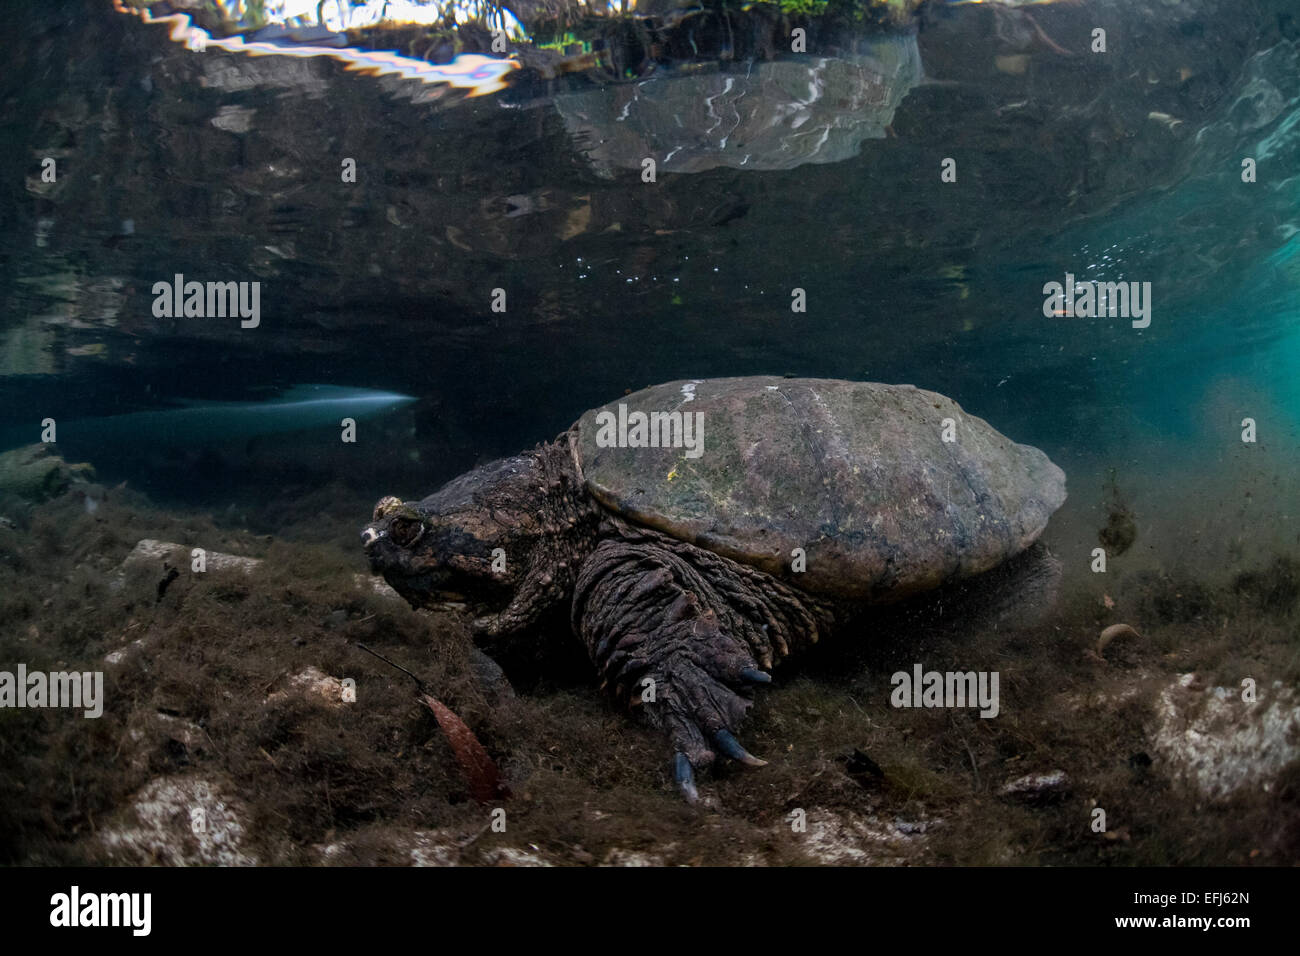 Common Snapping Turtle (Chelydra serpentina), Crystal River, Florida, United States Stock Photo